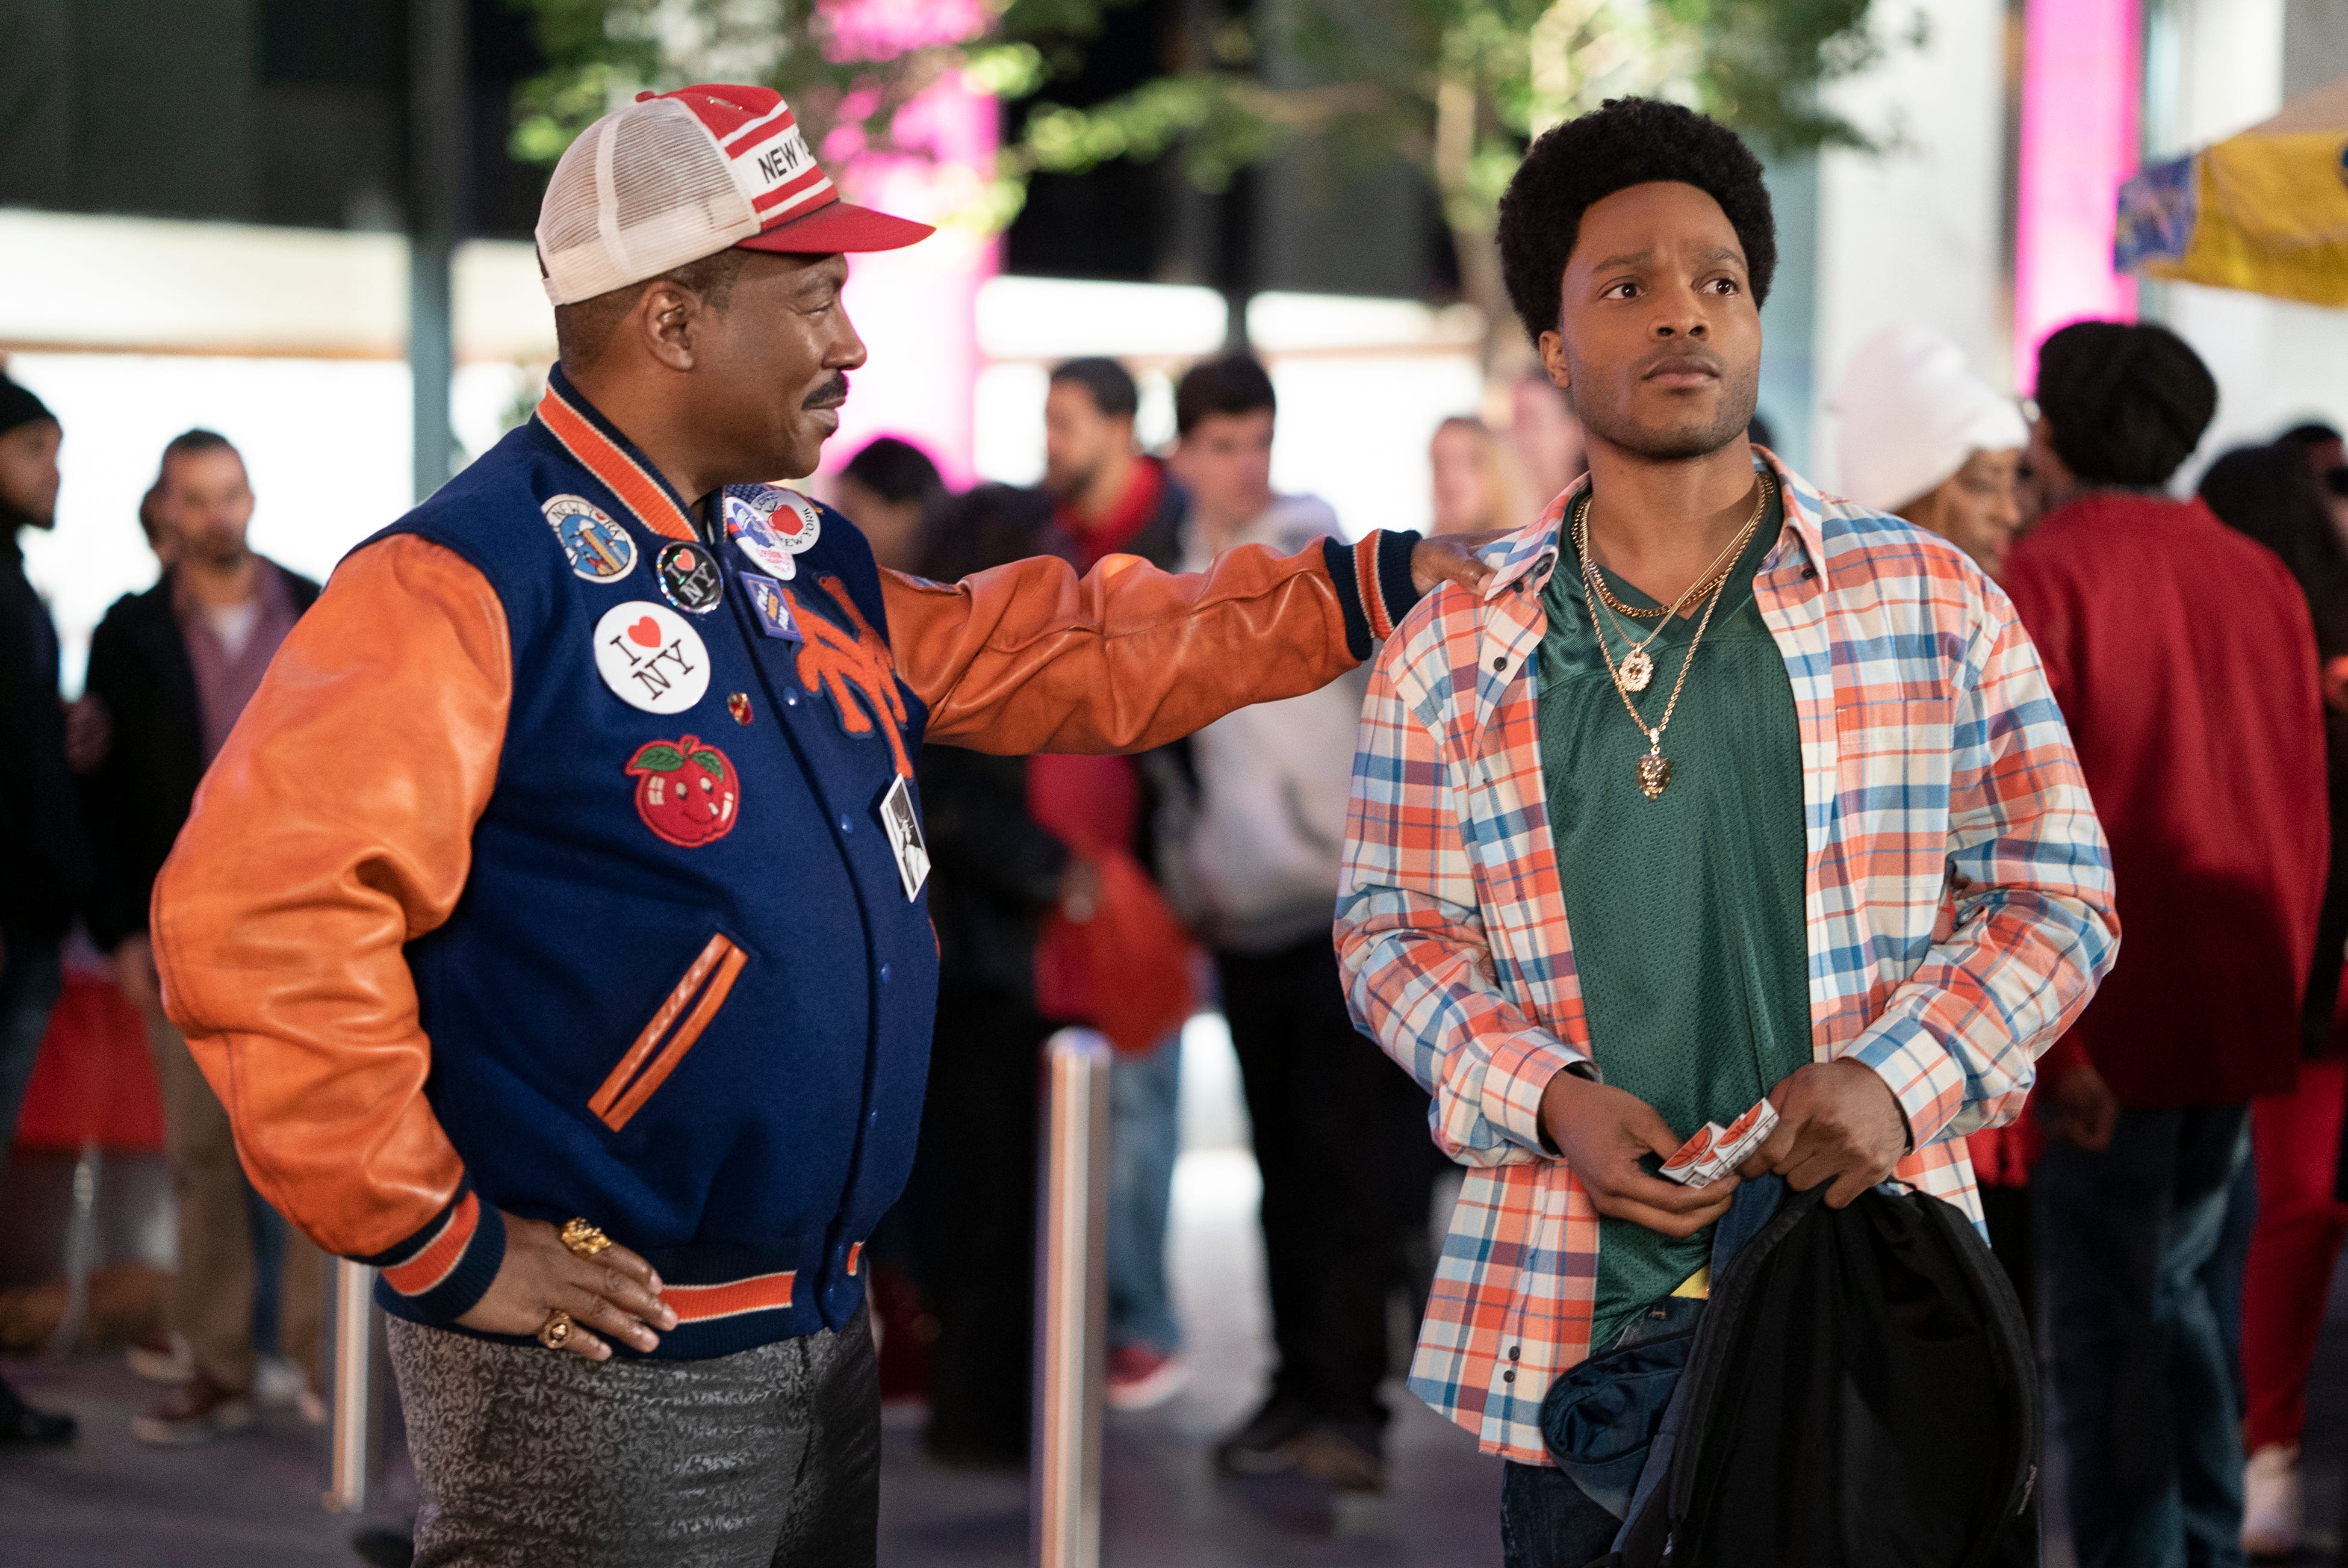 Review: 'Coming 2 America' eventually overcomes its flaws to deliver